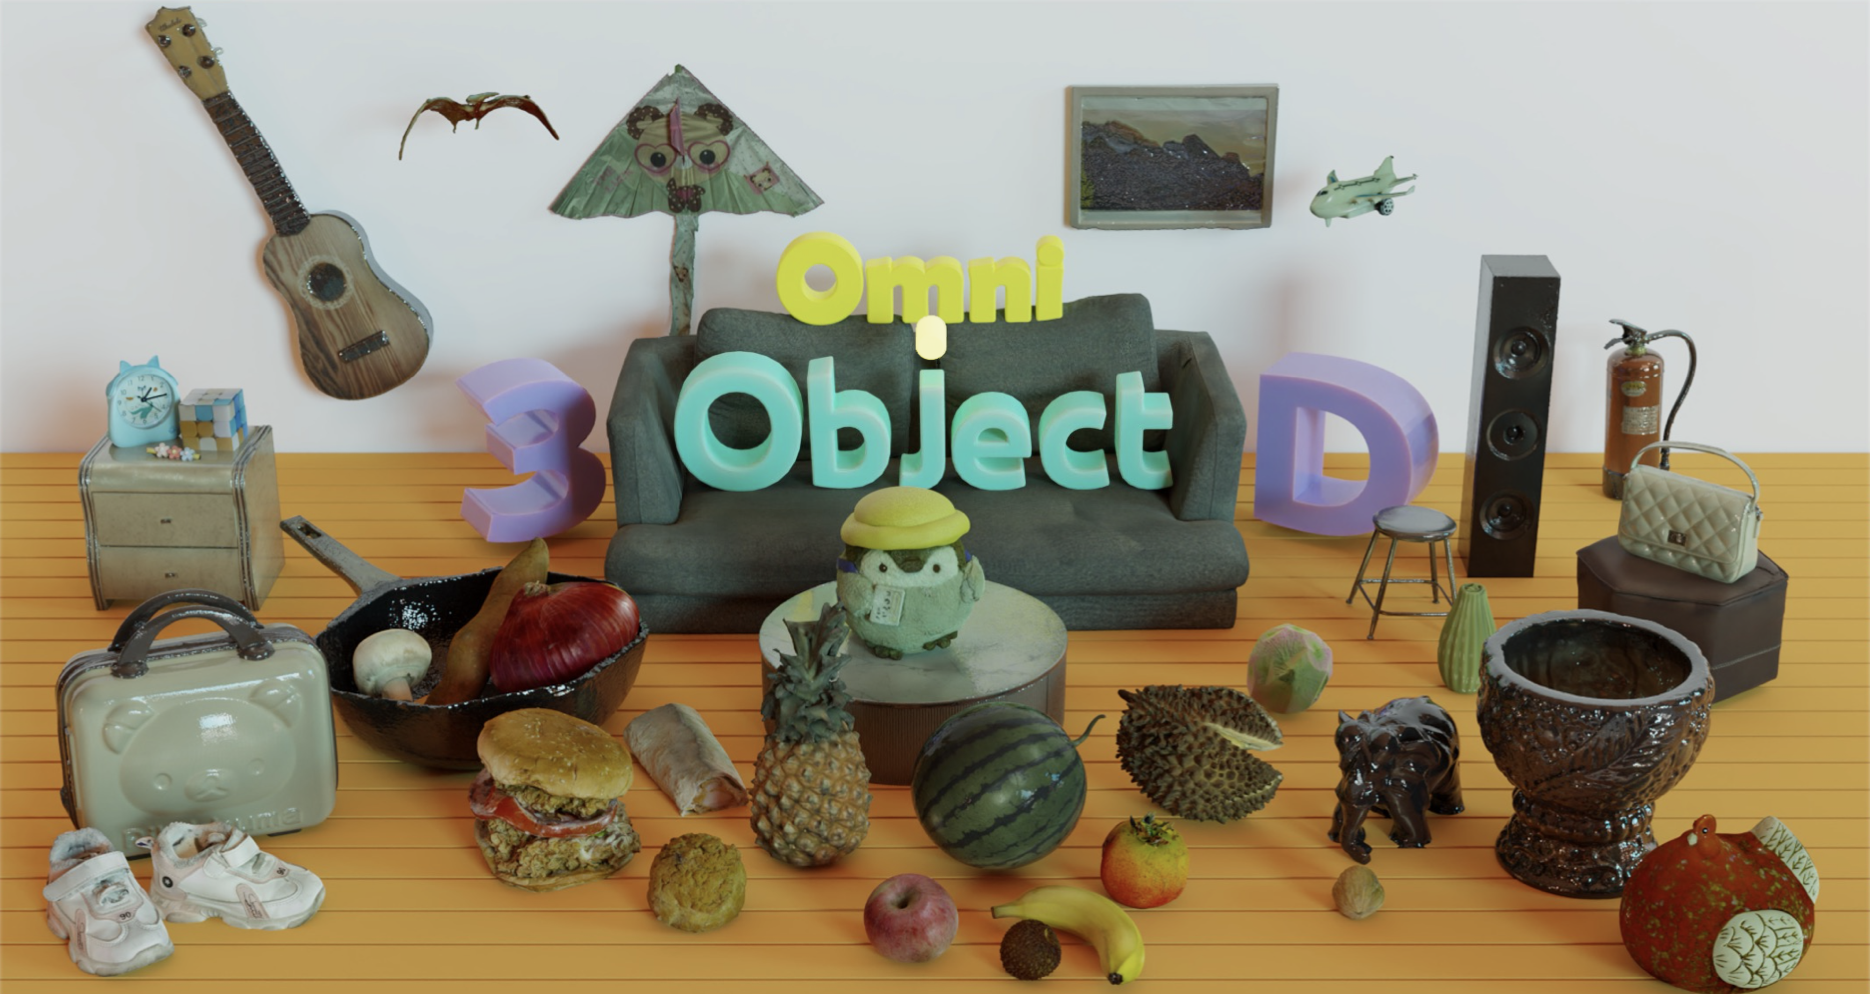 OmniObject3D: Large-Vocabulary 3D Object Dataset for Realistic Perception, Reconstruction and Generation